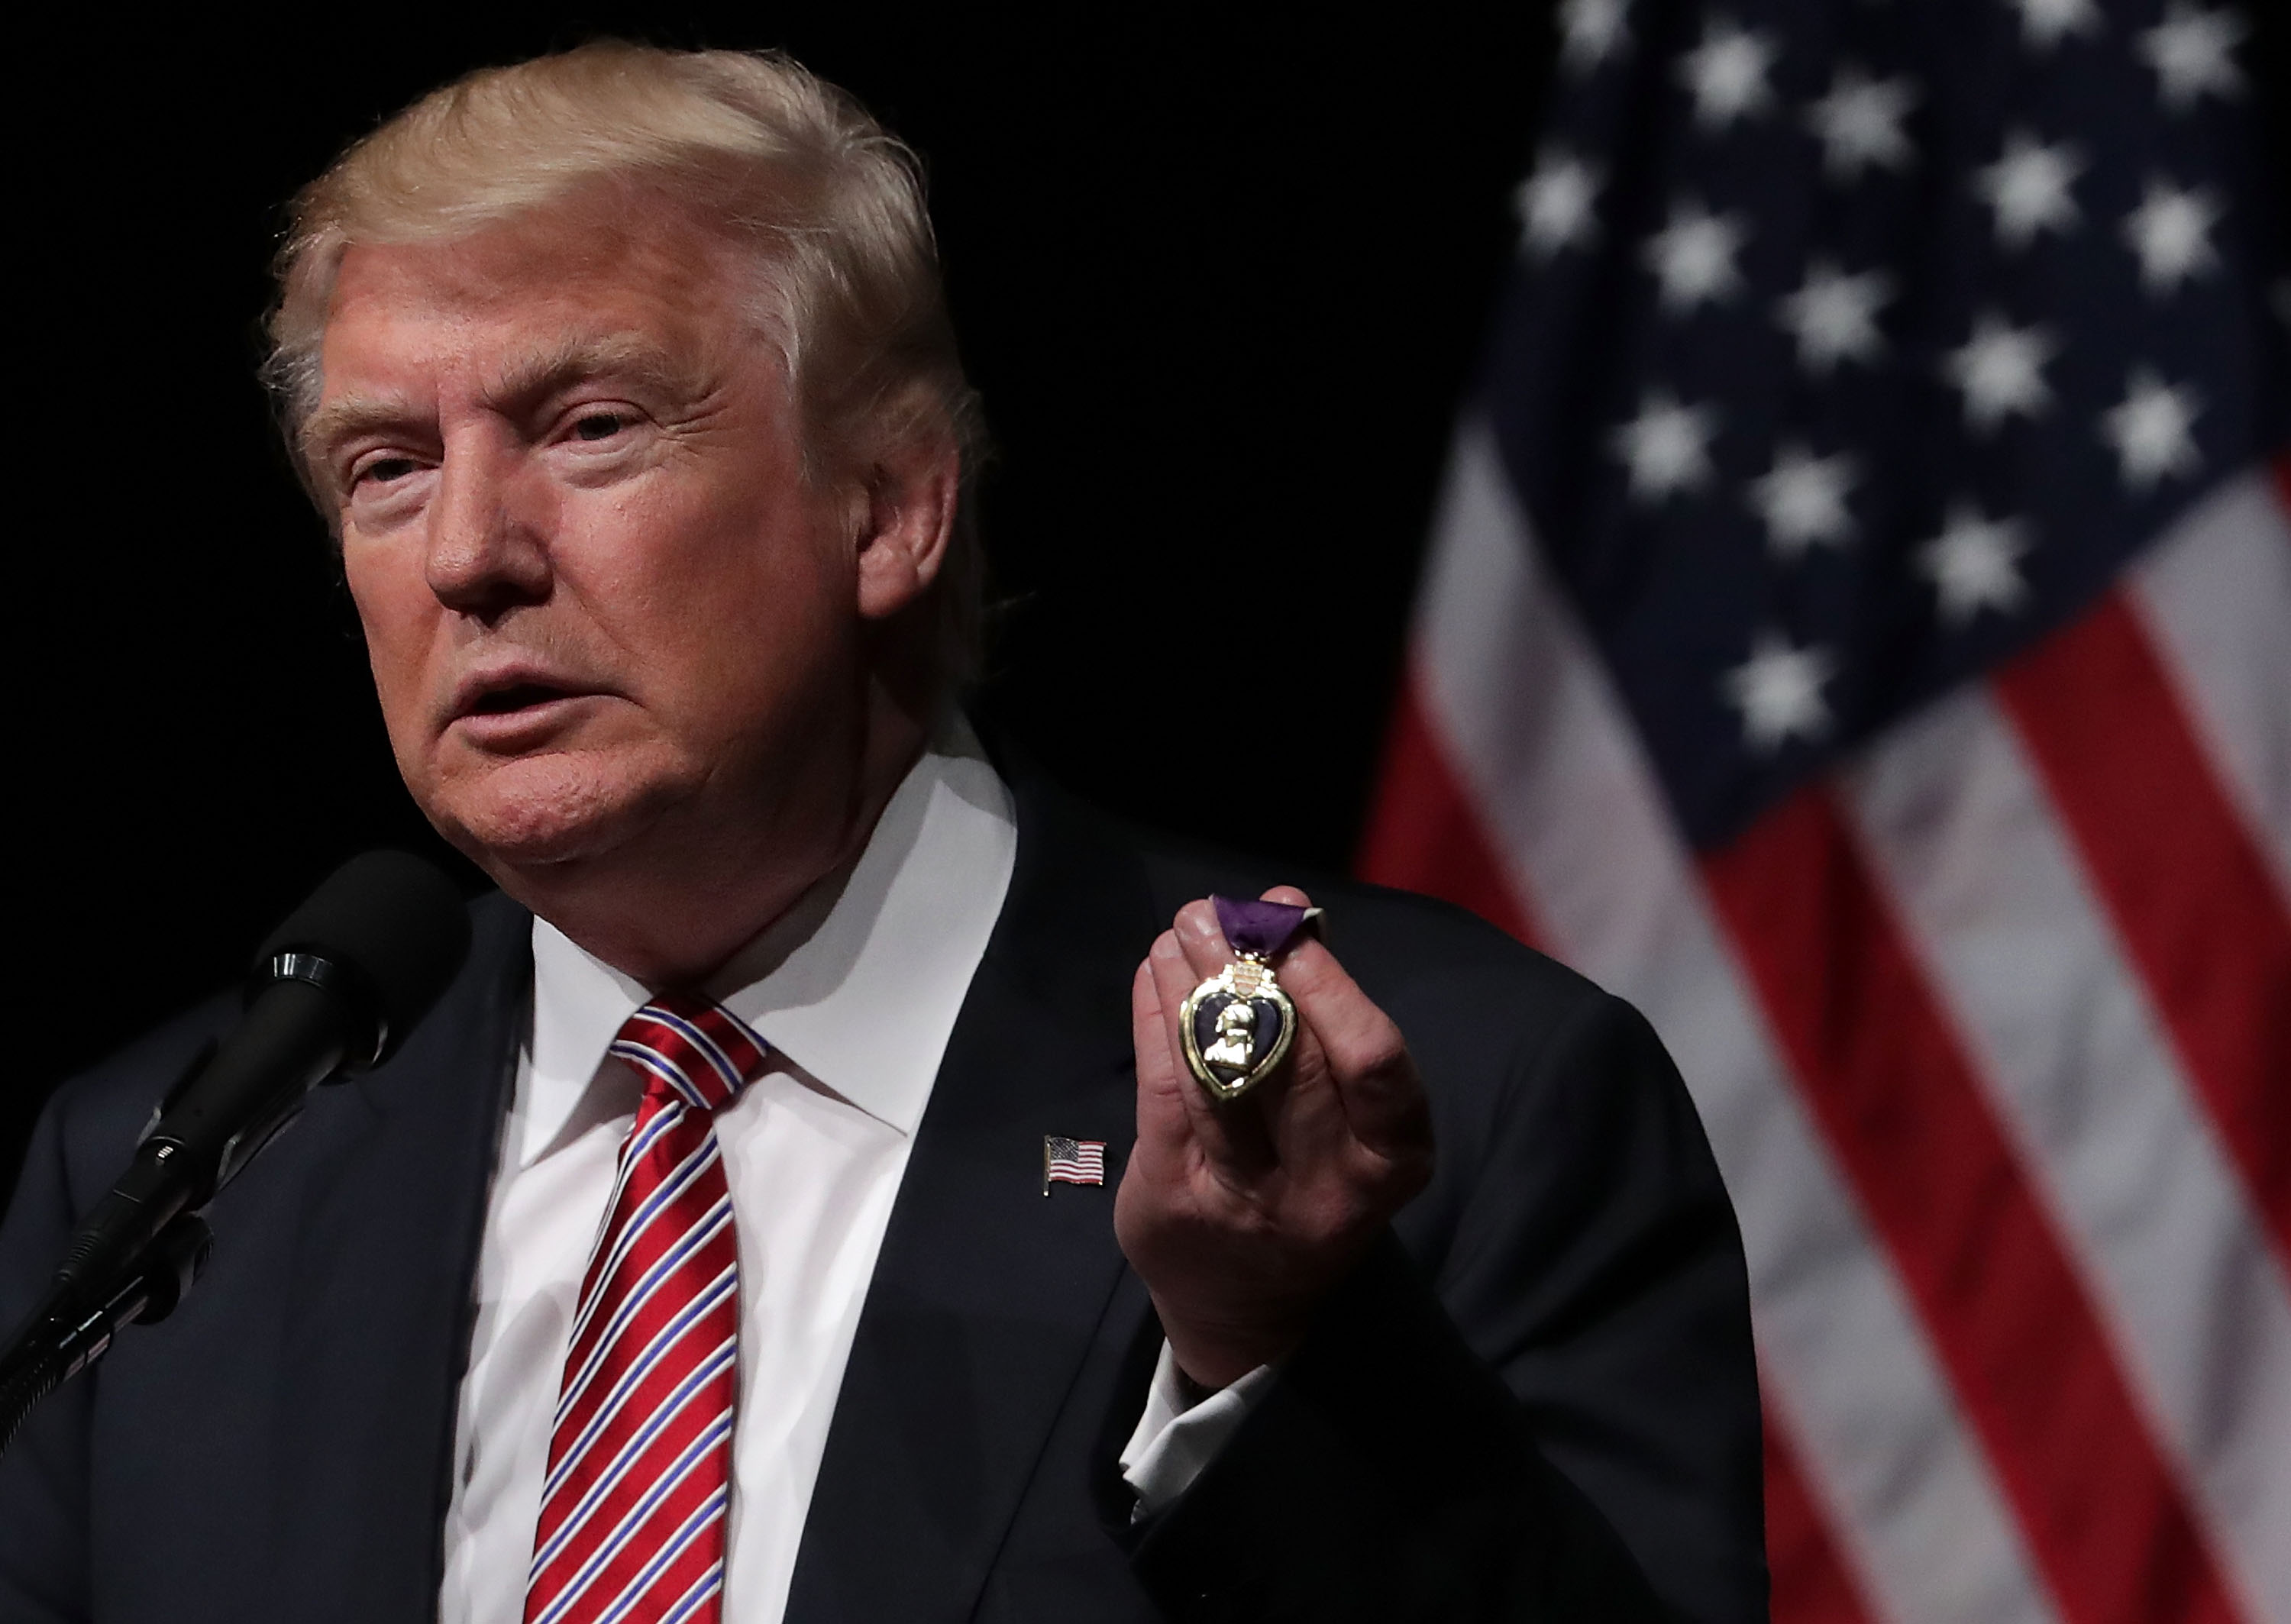 Republican presidential nominee Donald Trump holds a Purple Heart, given to him by veteran Louis Dorfman, during a campaign event at Briar Woods High School in Ashburn, Va., on Aug. 2, 2016.